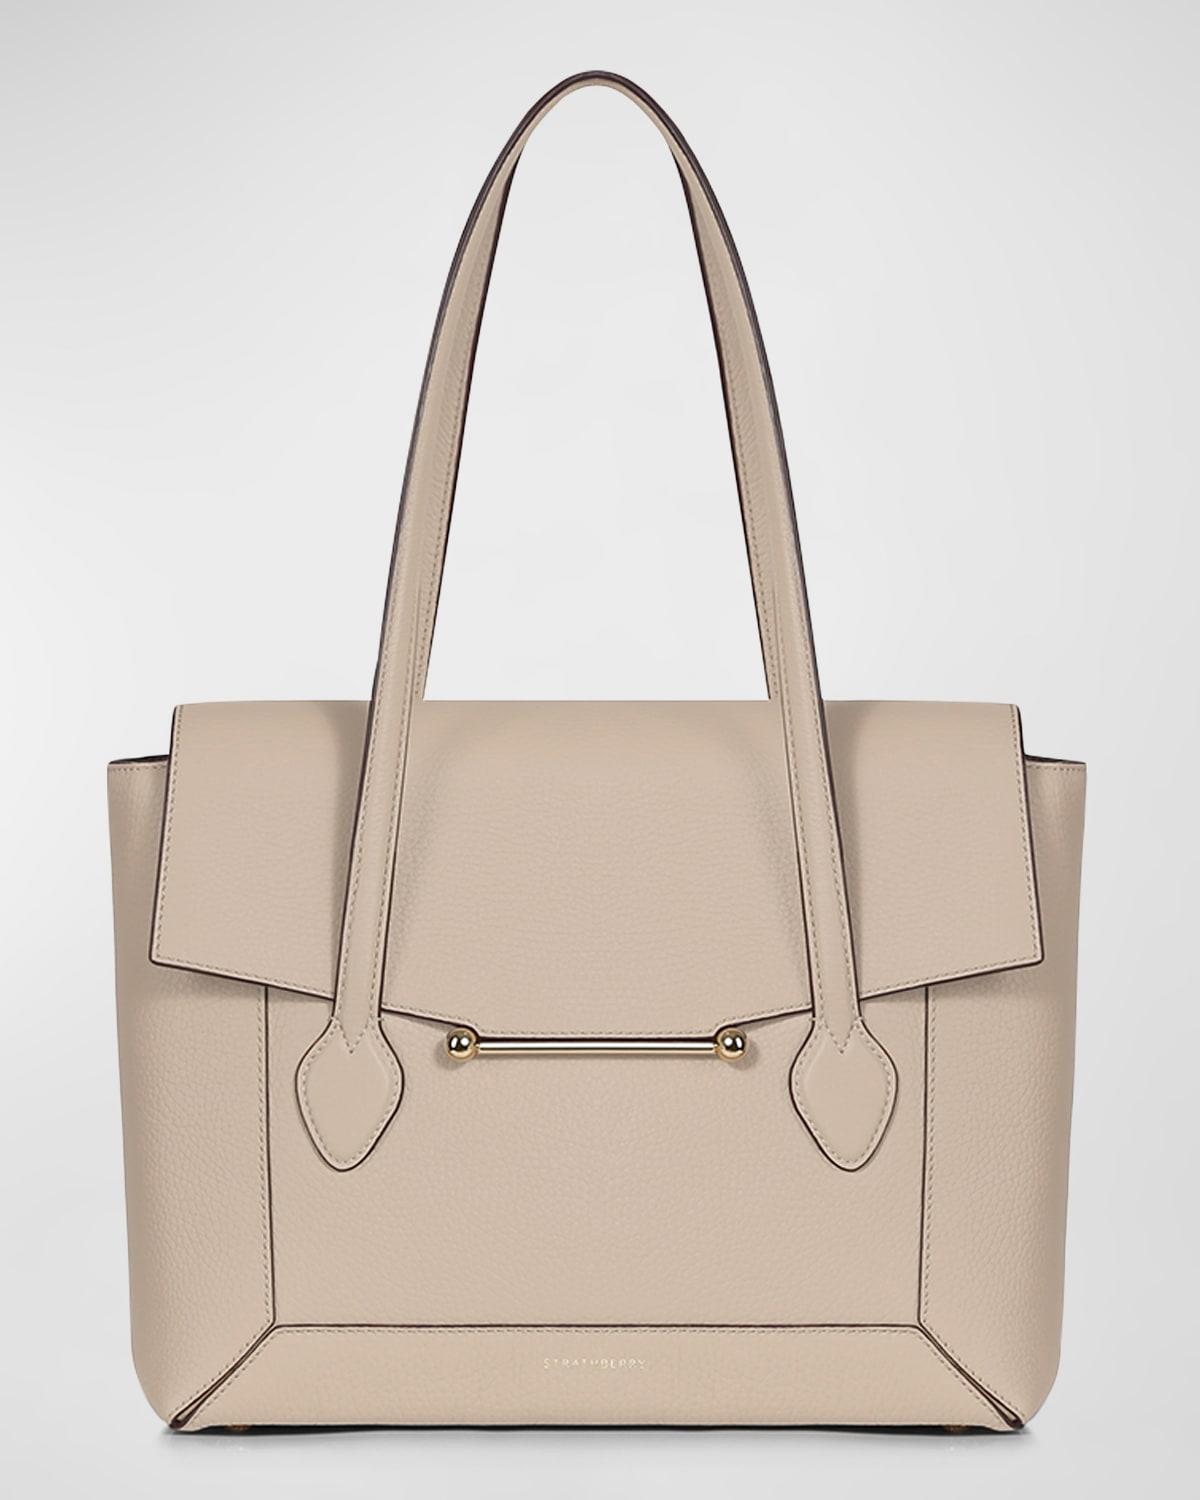 Strathberry Mosaic Leather Tote Bag in Natural | Lyst